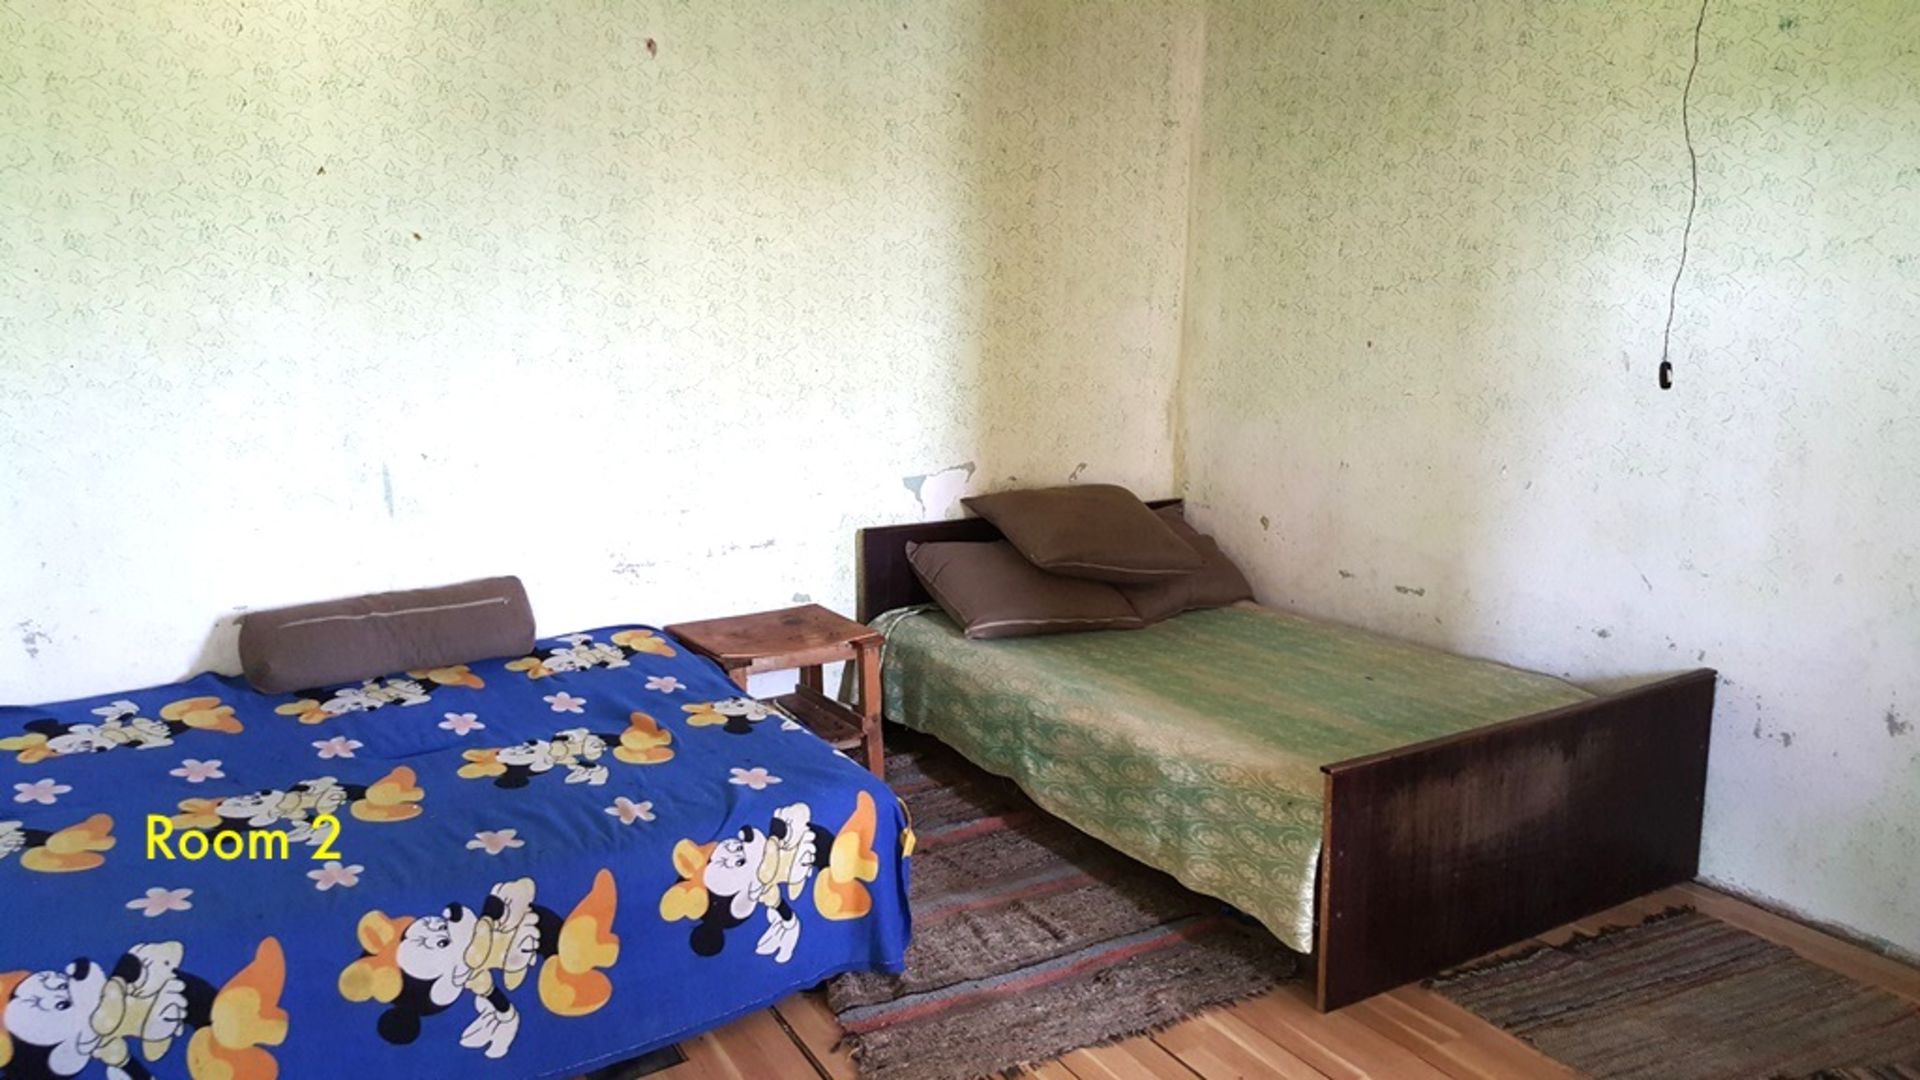 Sunny Bulgarian cottage 30 miles from beaches   Here is a great opportunity to snap up a well- - Image 19 of 26